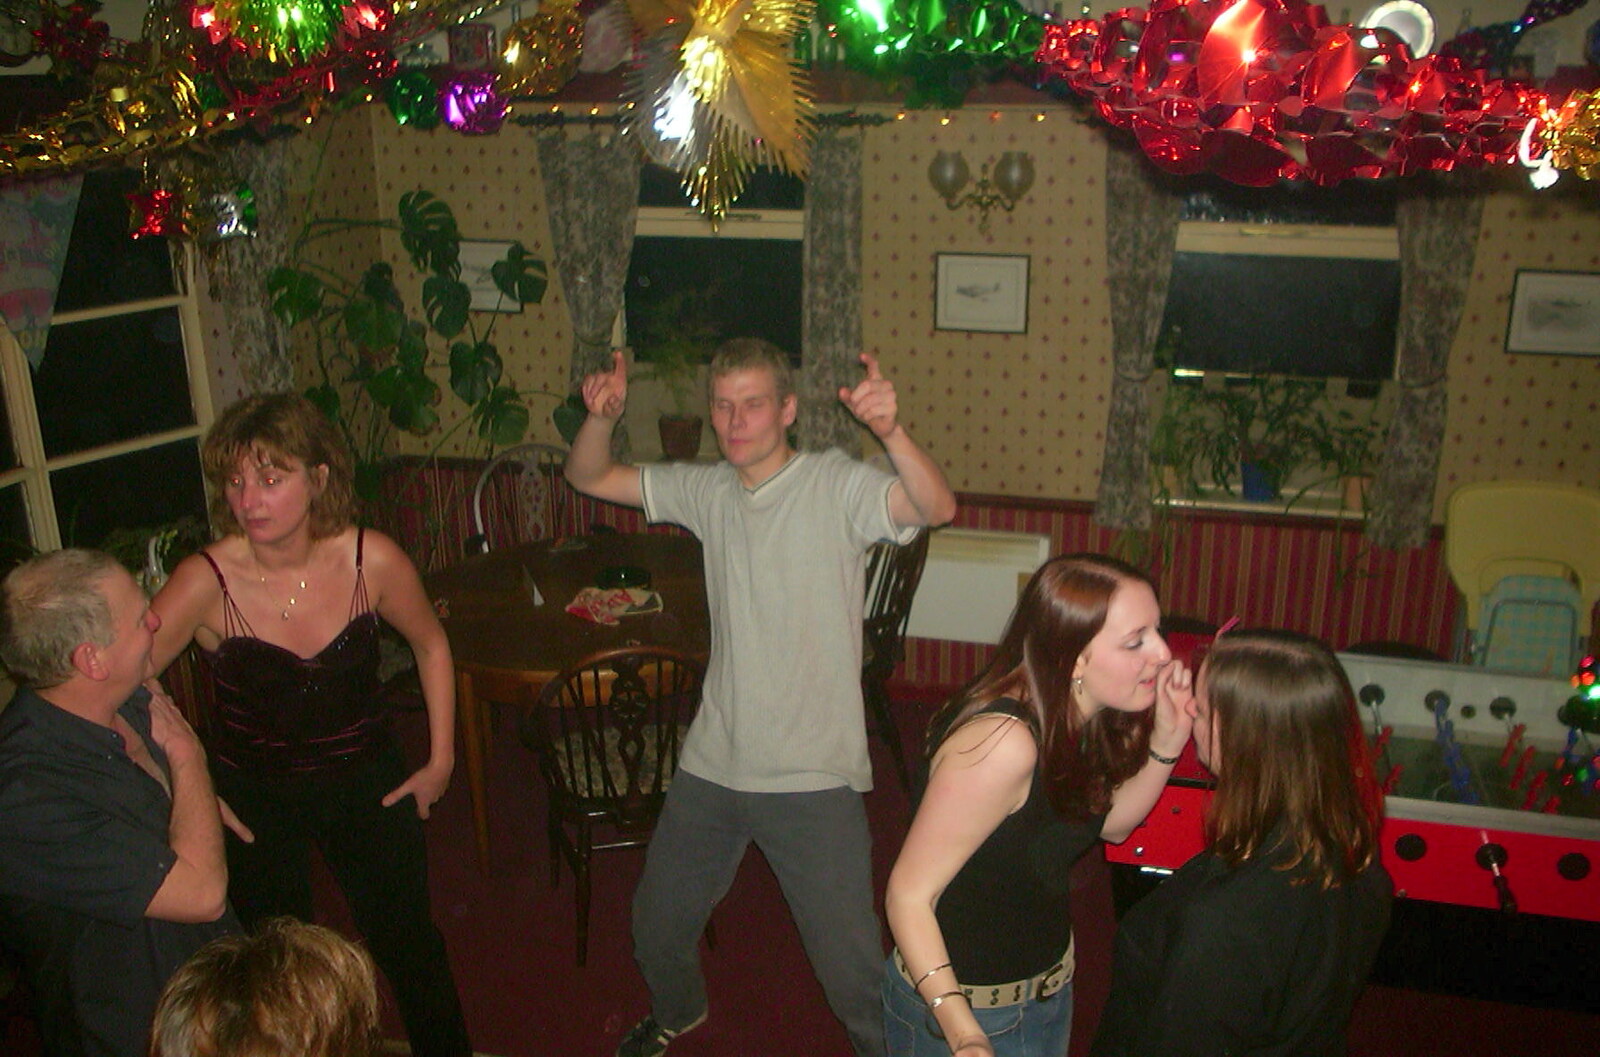 New Year's Eve at the Swan Inn, Brome, Suffolk - 31st December 2002: Bill wigs out in the disco room